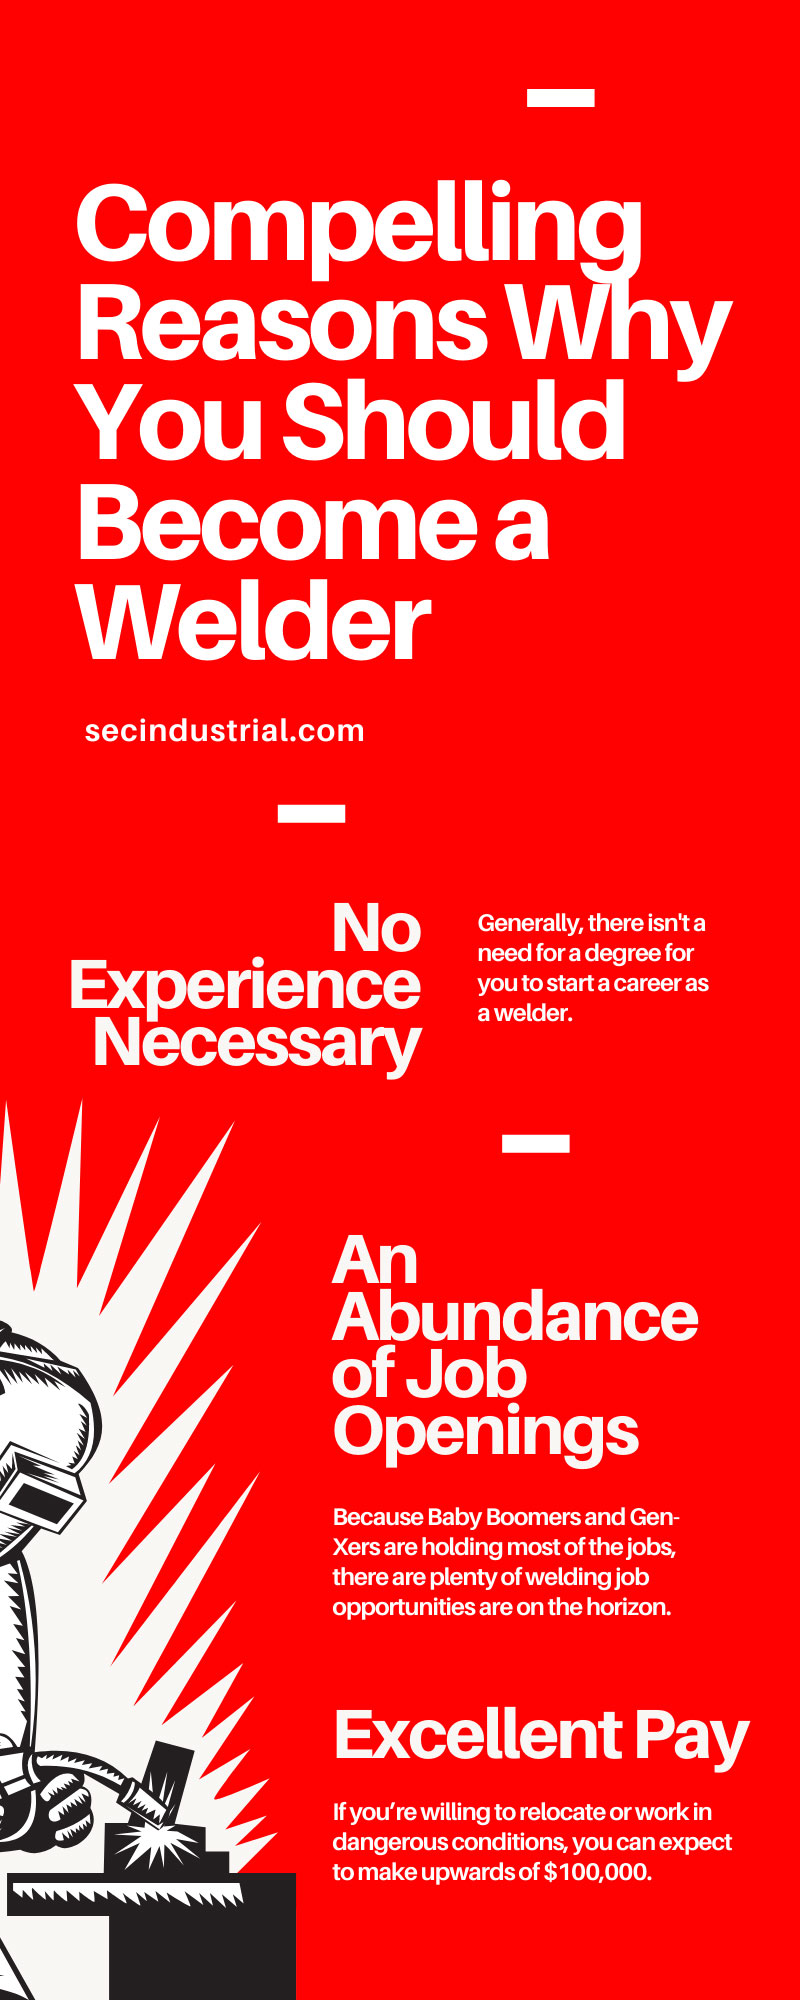 Compelling Reasons Why You Should Become a Welder